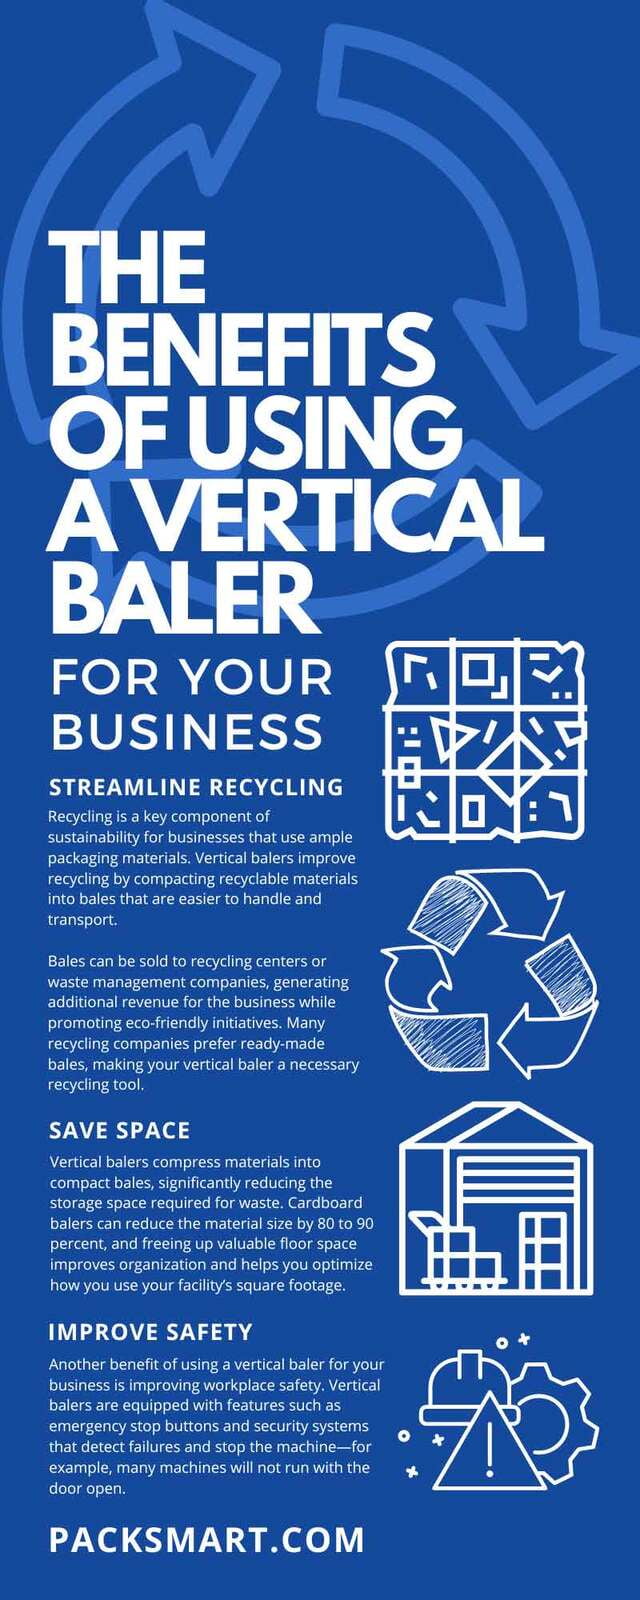 The Benefits of Using a Vertical Baler for Your Business